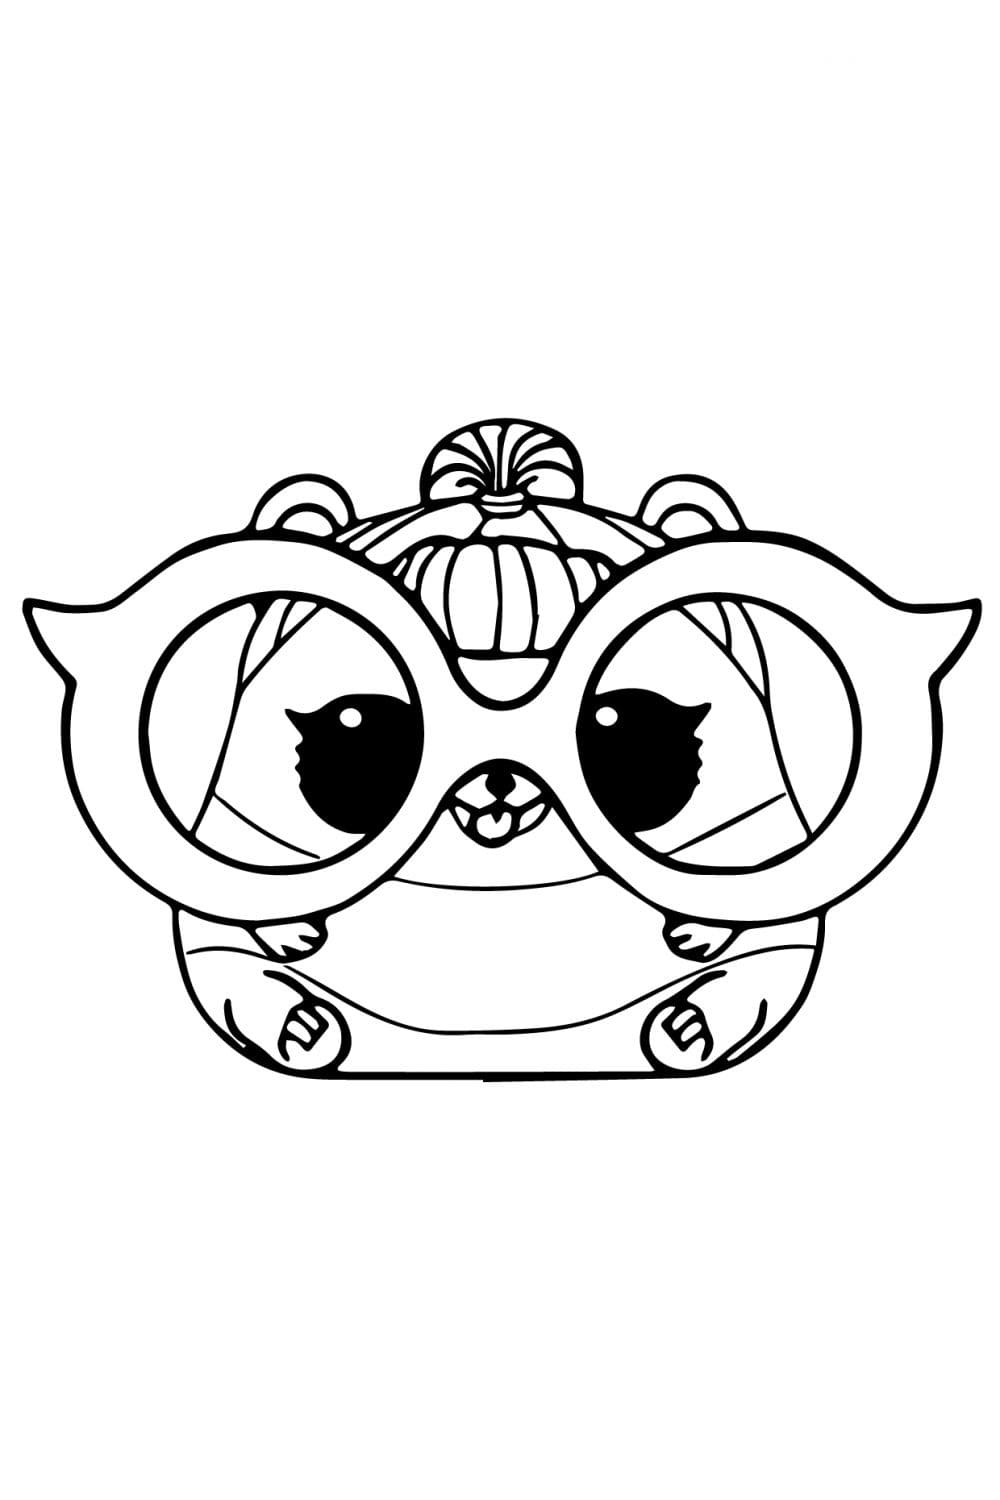 LOL Pet Hamster Coloring Page   Free Printable Coloring Pages for Kids